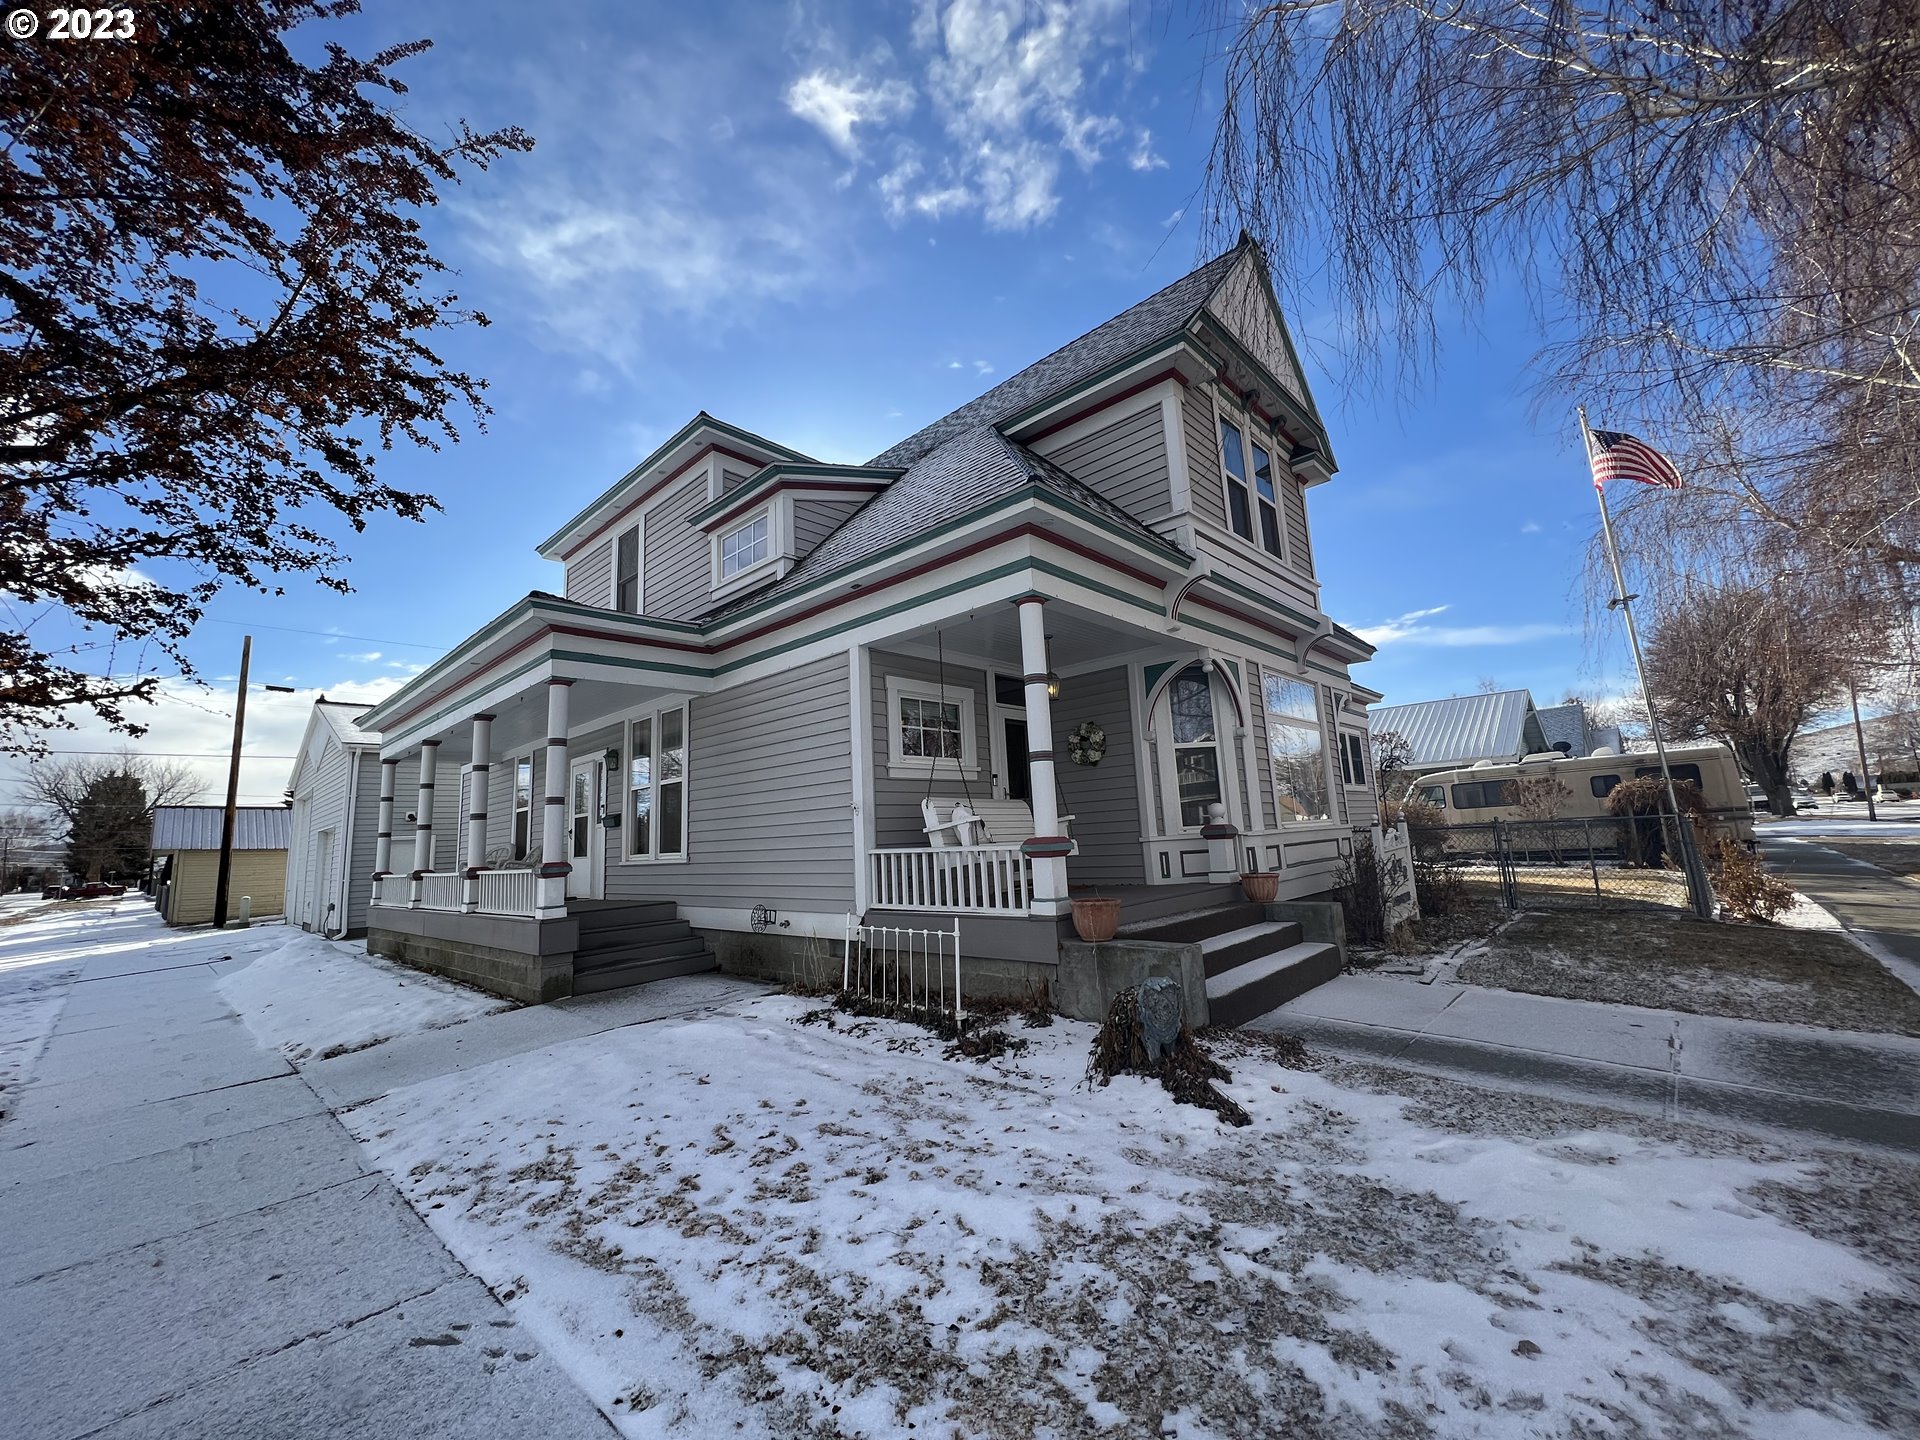 Truly historic Baker City! This five bedroom, three bath home is the ideal combination of both a heritage home and all the modern amenities.  Well suited for both personal living space and a potential Airbnb business, this classic home includes a private patio and yard with adjacent 32' x 56' shop that includes full RV parking and an enclosed workshop.  Whether entertaining indoors and out, or enjoying the evening sitting out on the side porch, past and present come together here in Baker City!